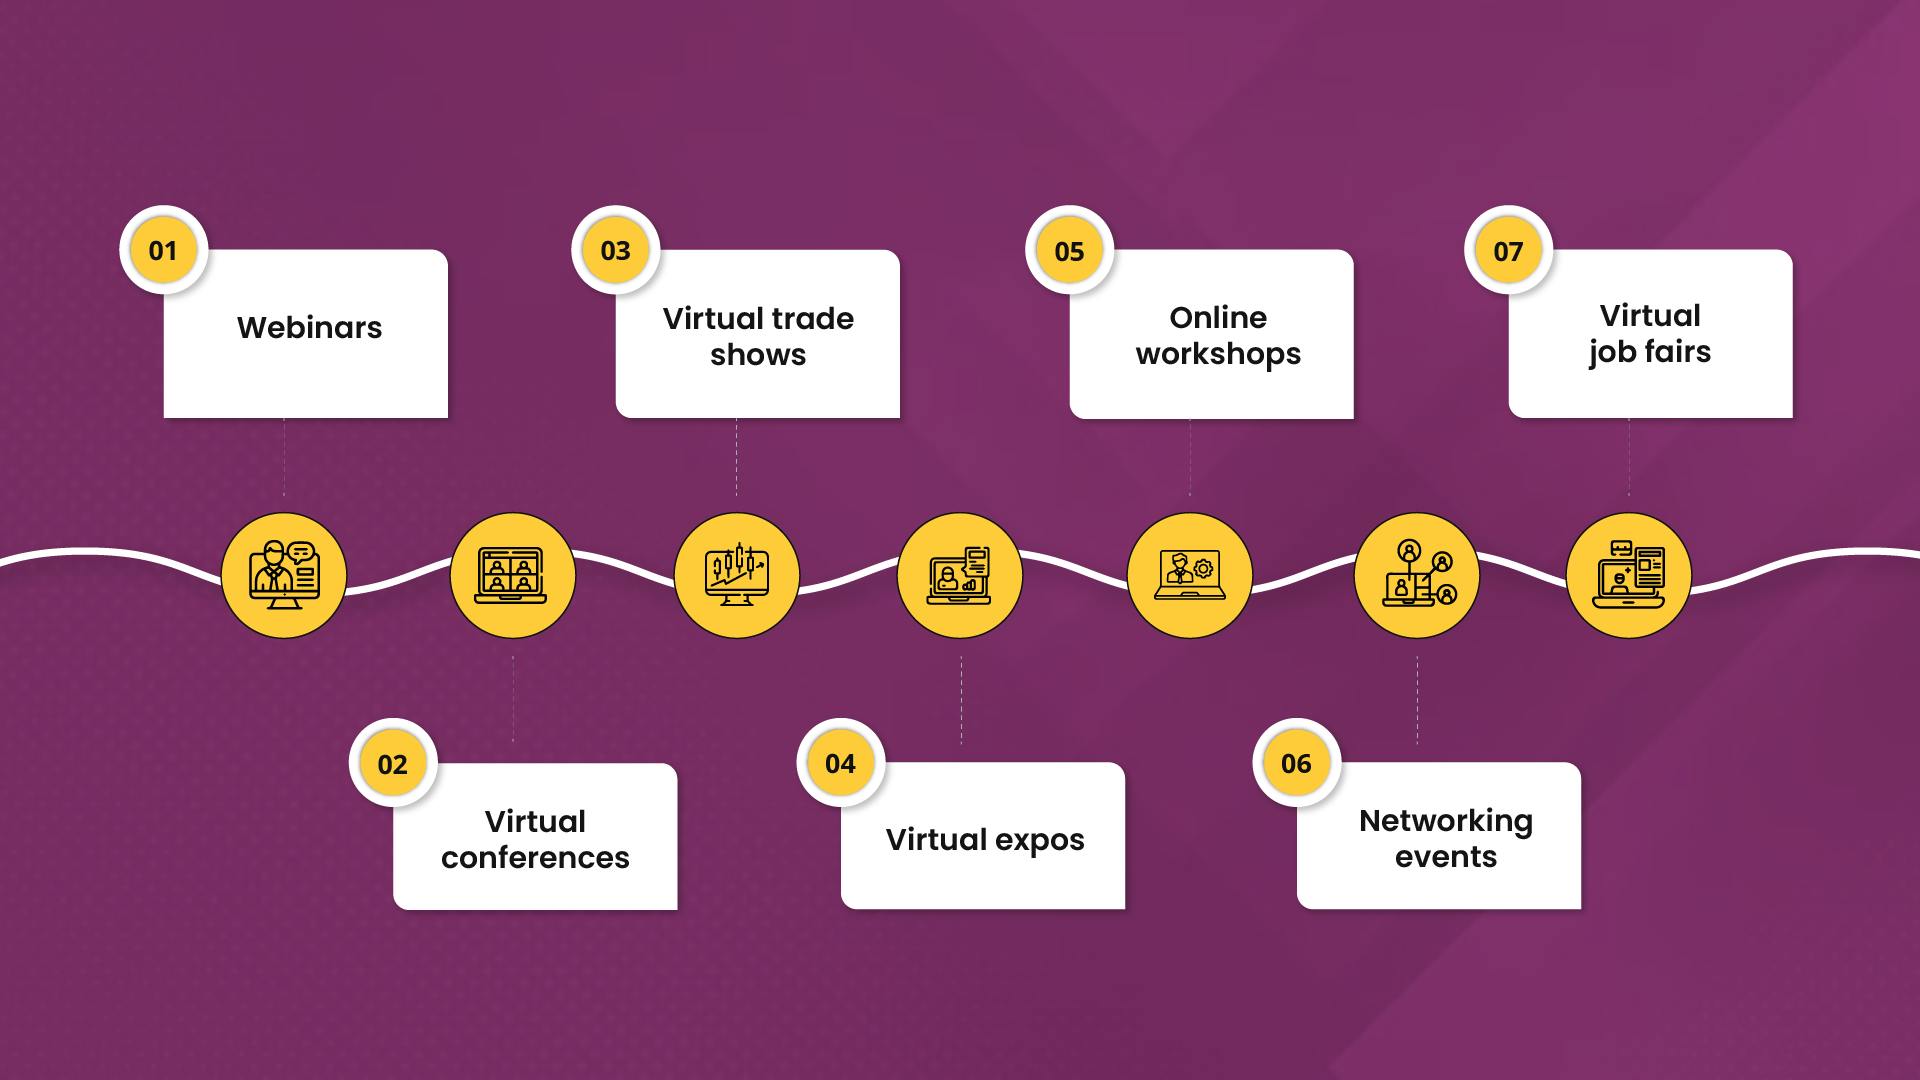 Types of virtual events